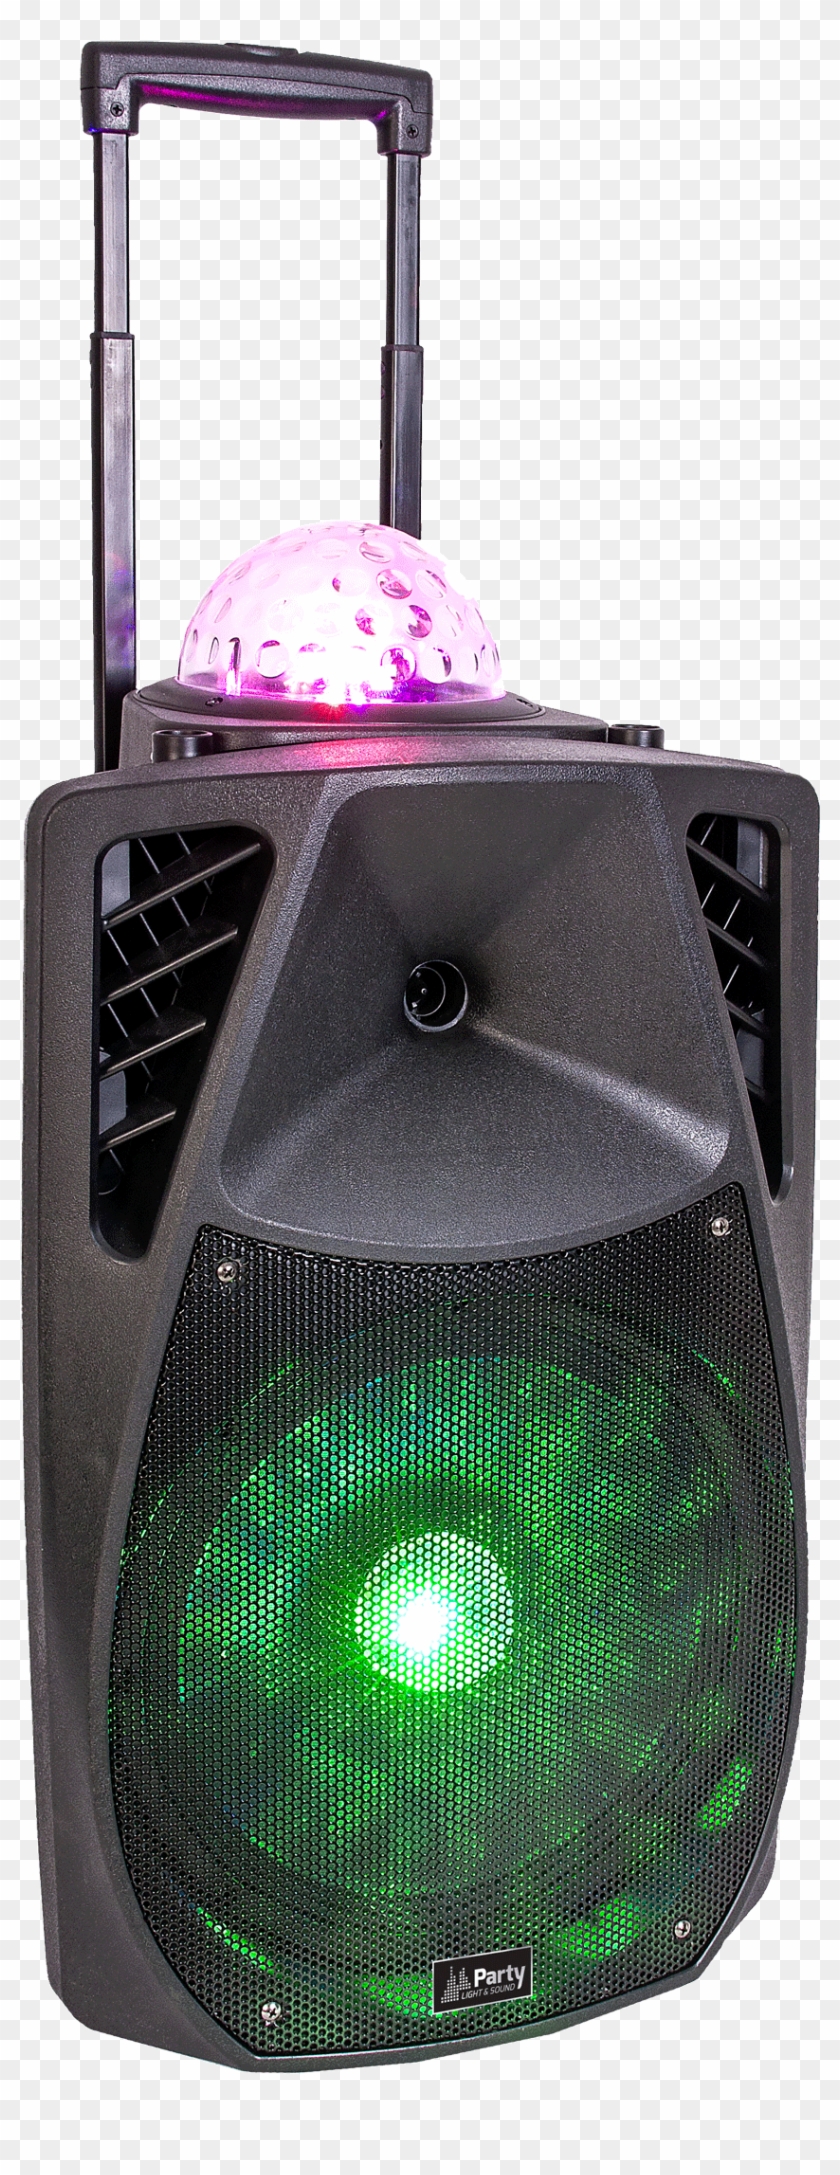 Party-12astro Portable Sound & Light System 12''/30cm - Party 12astro Clipart